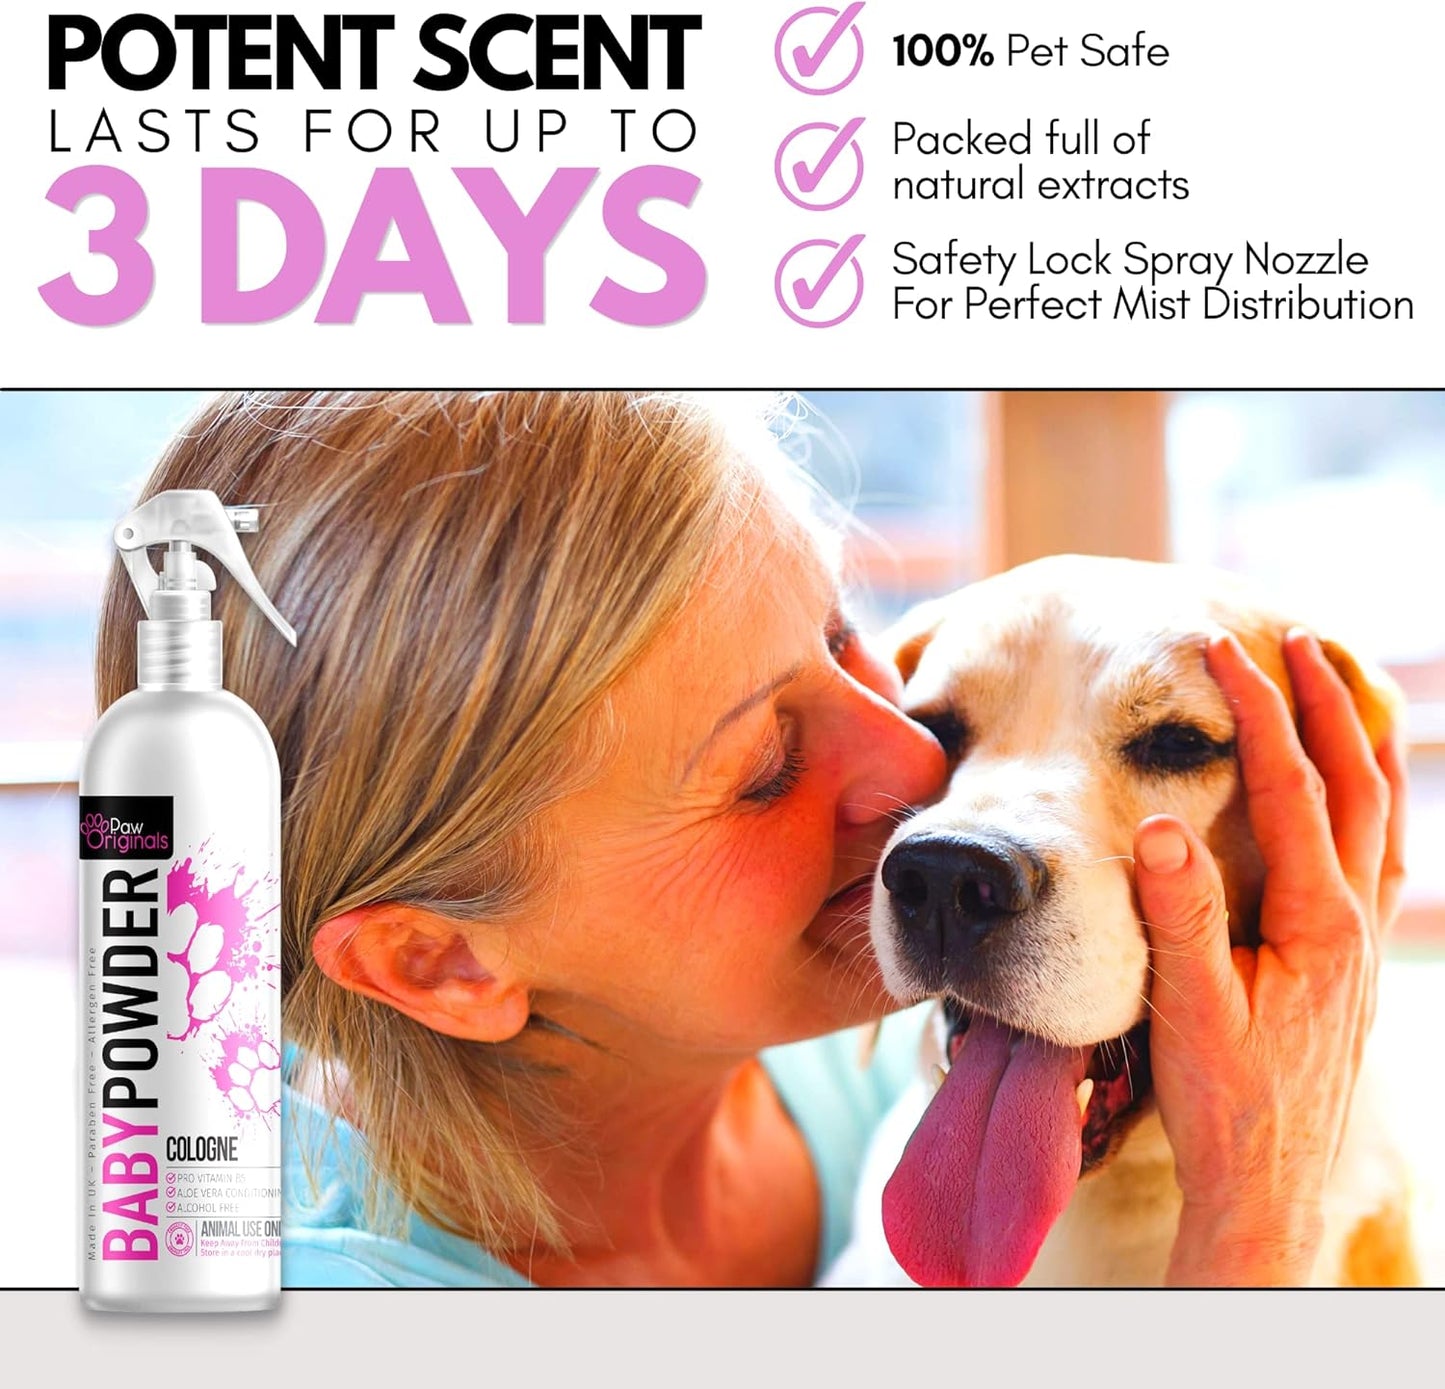 Perfume spray for dogs - The ultimate perfume that also soothes the coat and skin